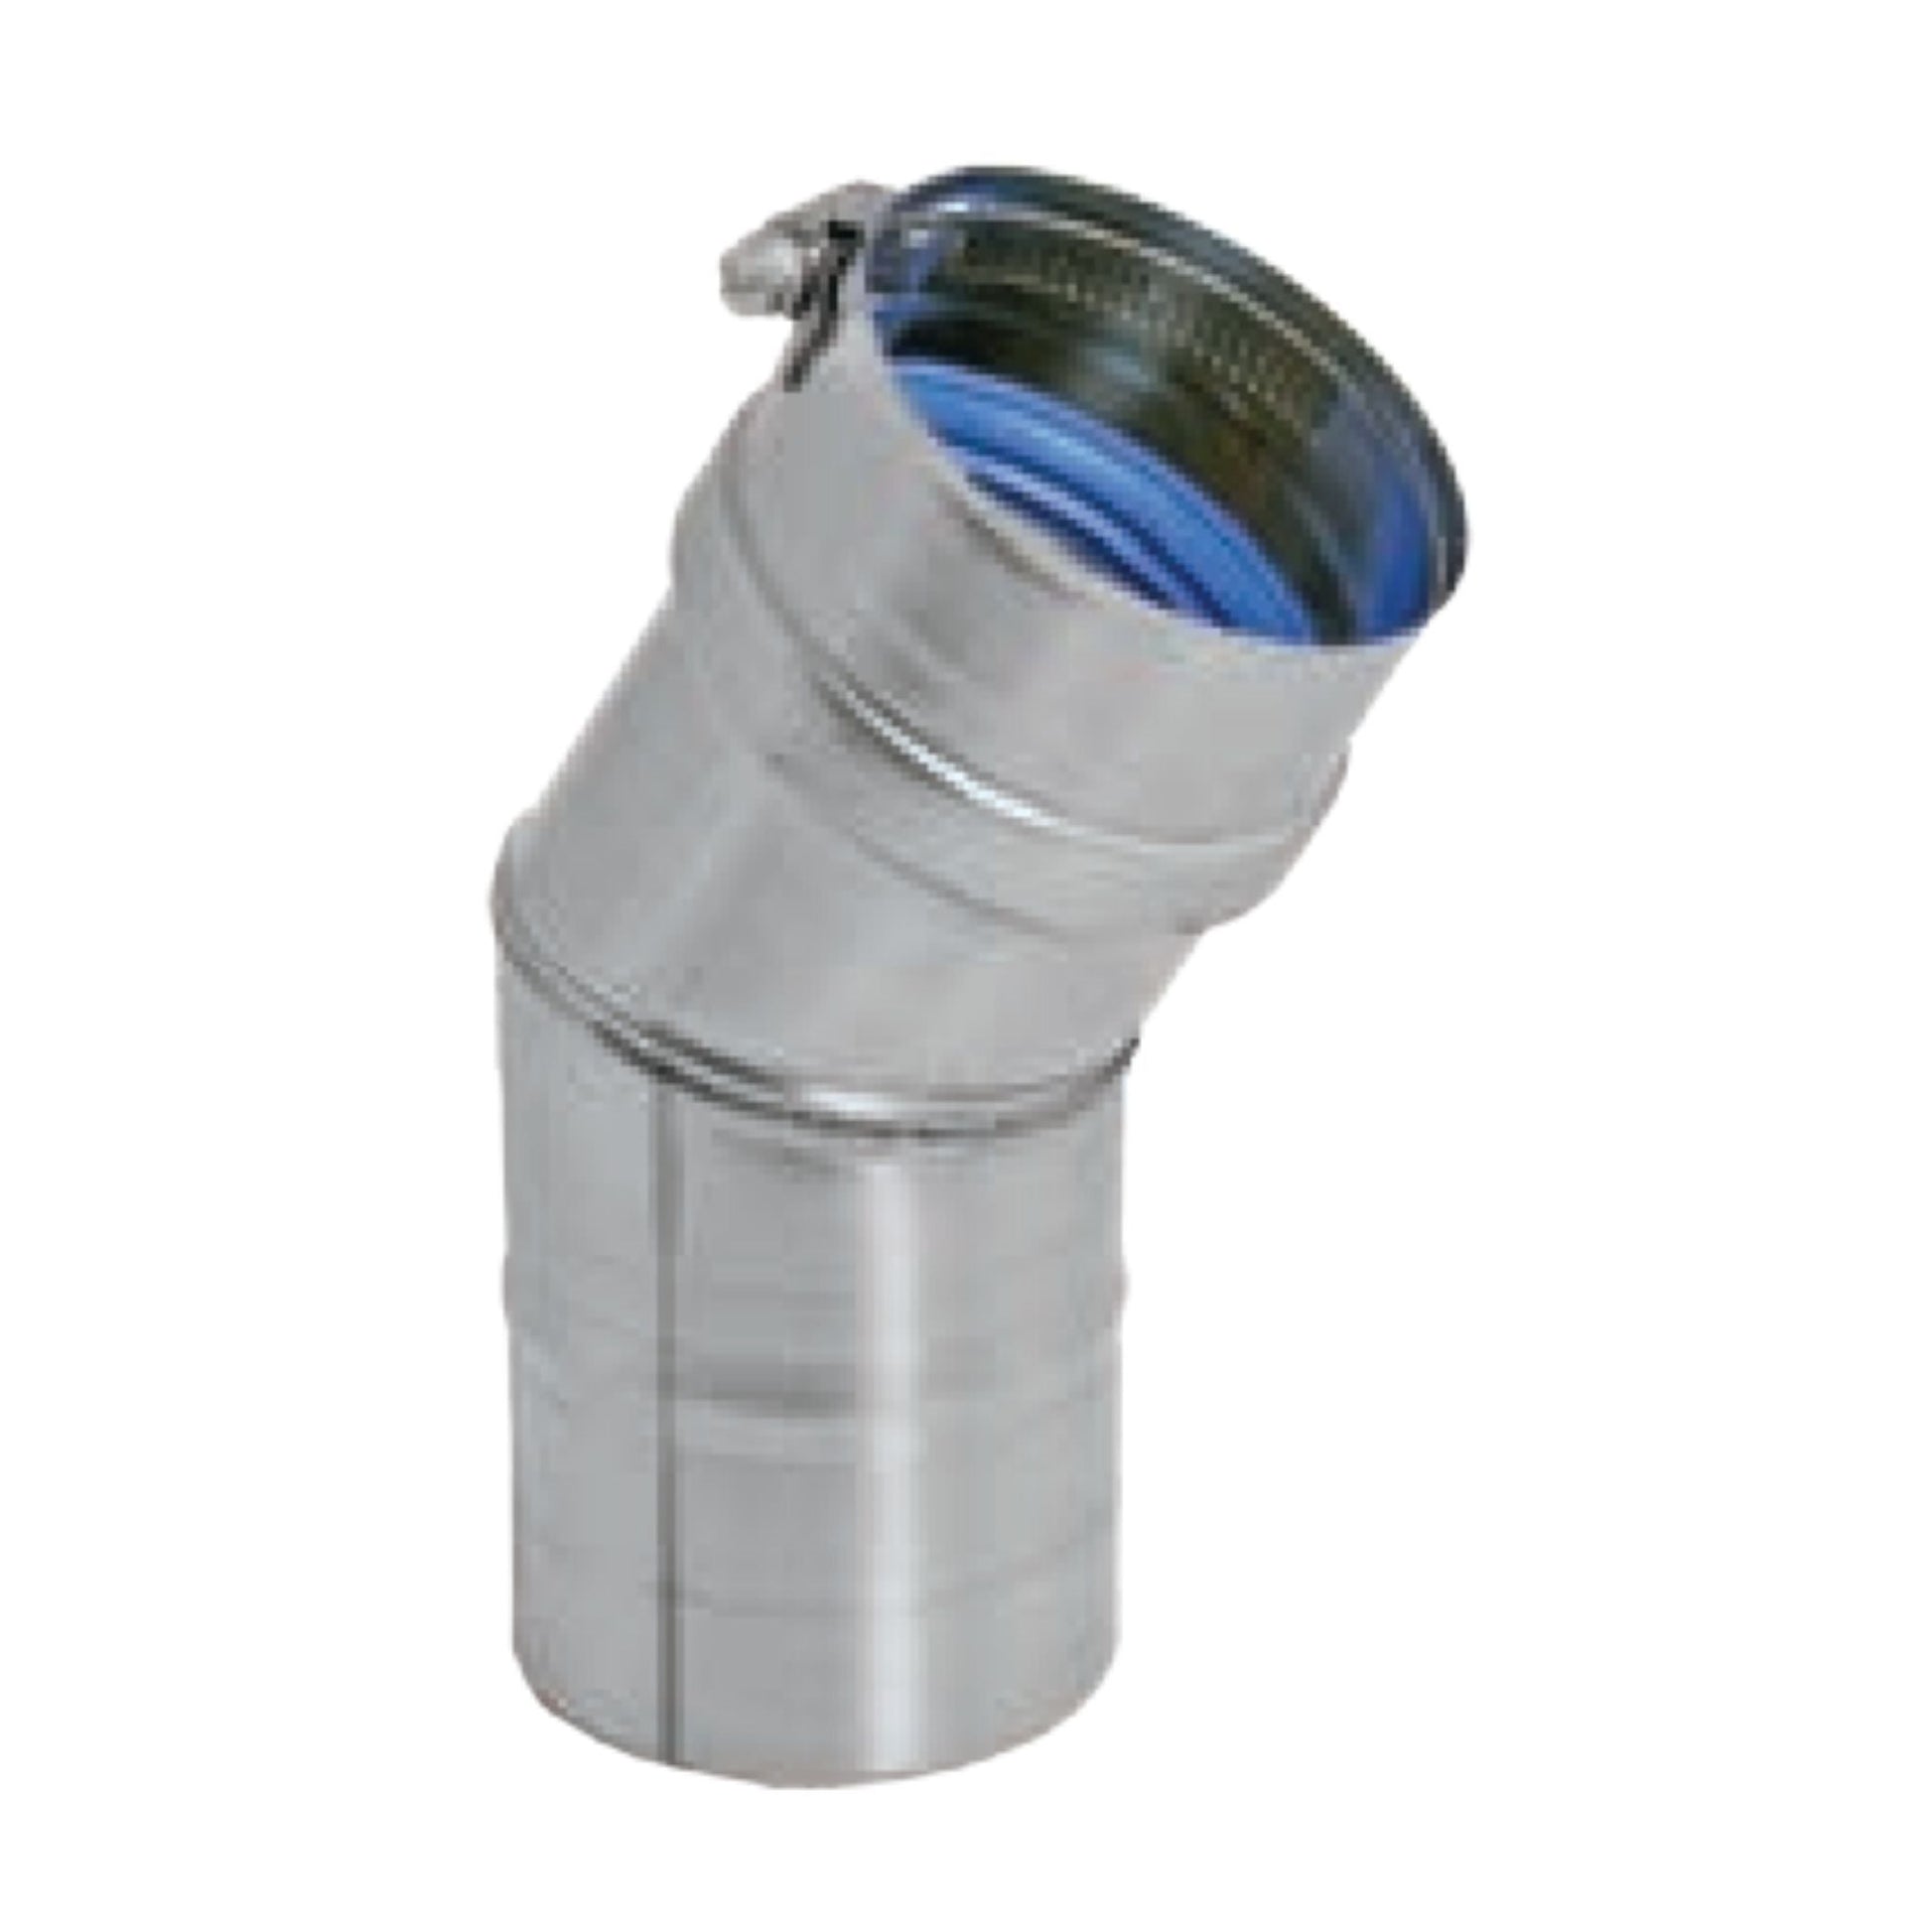 DuraVent FasNSeal 5" 30 Degree 29-4C Stainless Steel Elbow